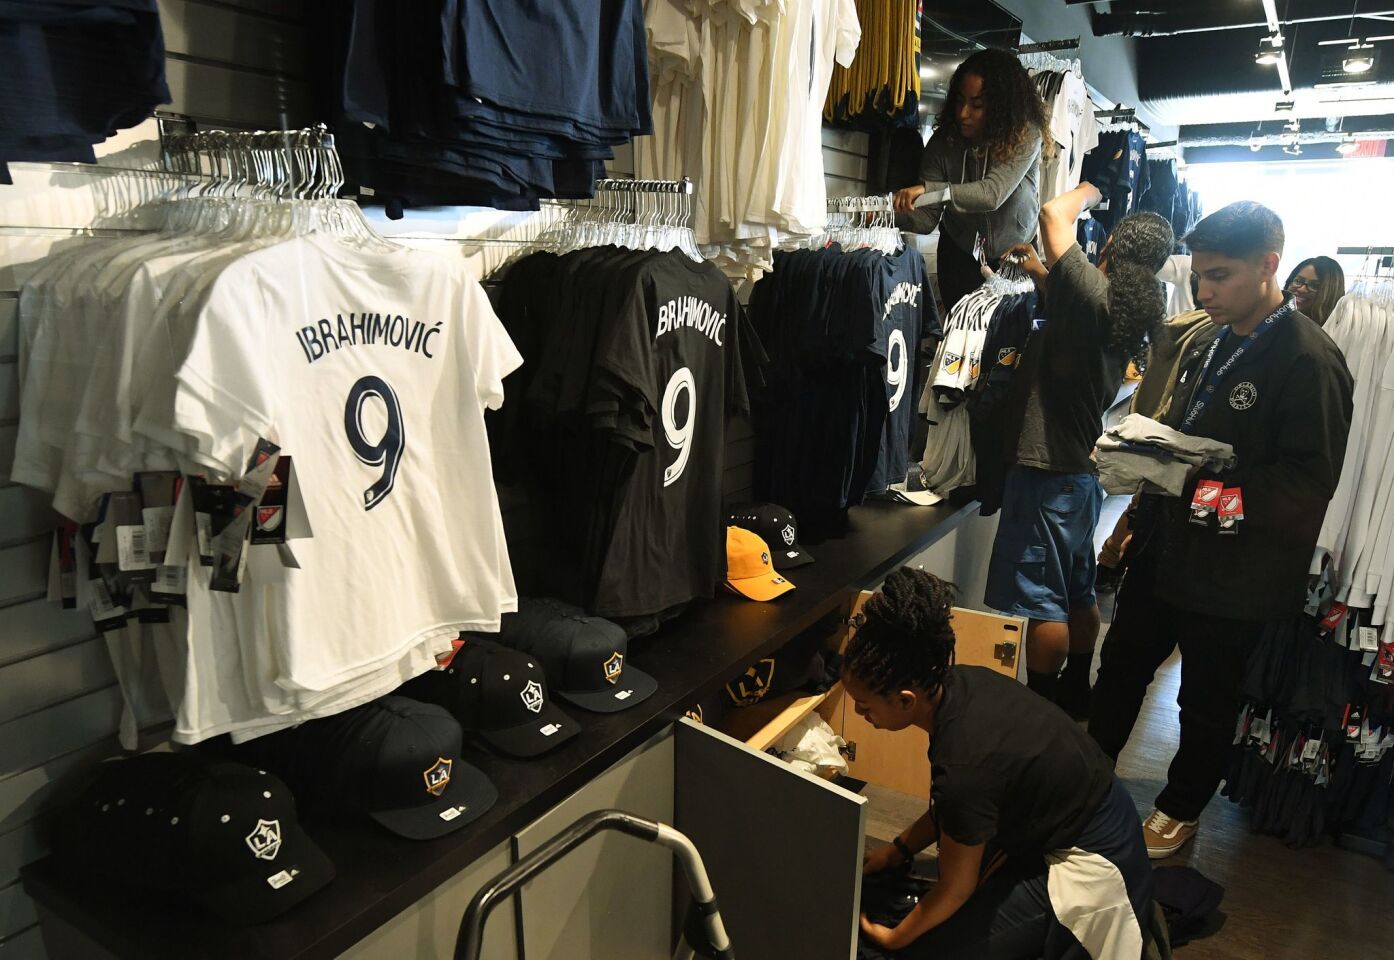 Store staff prepare for sales of the new jersey for football star Zlatan Ibrahimovic after his first training session with his new club LA Galaxy in Los Angeles, California, on March 30, 2018. The 36-year-old Swedish striker's move to MLS from Manchester United was confirmed last week, with Ibrahimovic swiftly vowing to reignite the Galaxy's fortunes after they finished bottom of the league last season. / AFP PHOTO / Mark RALSTONMARK RALSTON/AFP/Getty Images ** OUTS - ELSENT, FPG, CM - OUTS * NM, PH, VA if sourced by CT, LA or MoD **